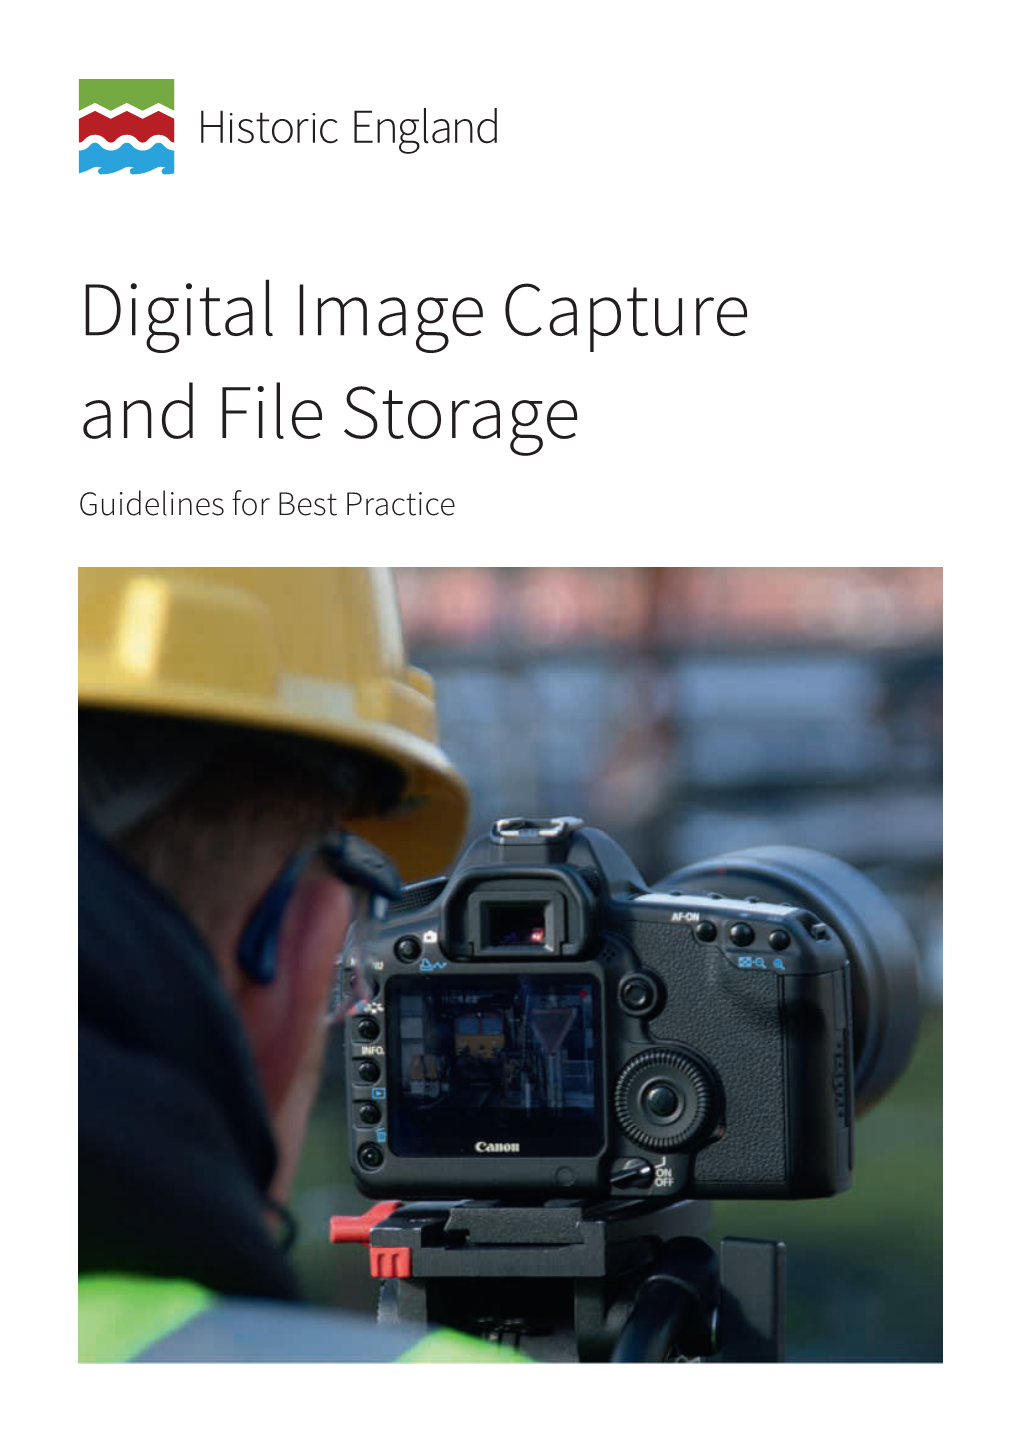 Digital Image Capture and File Storage Guidelines for Best Practice Summary